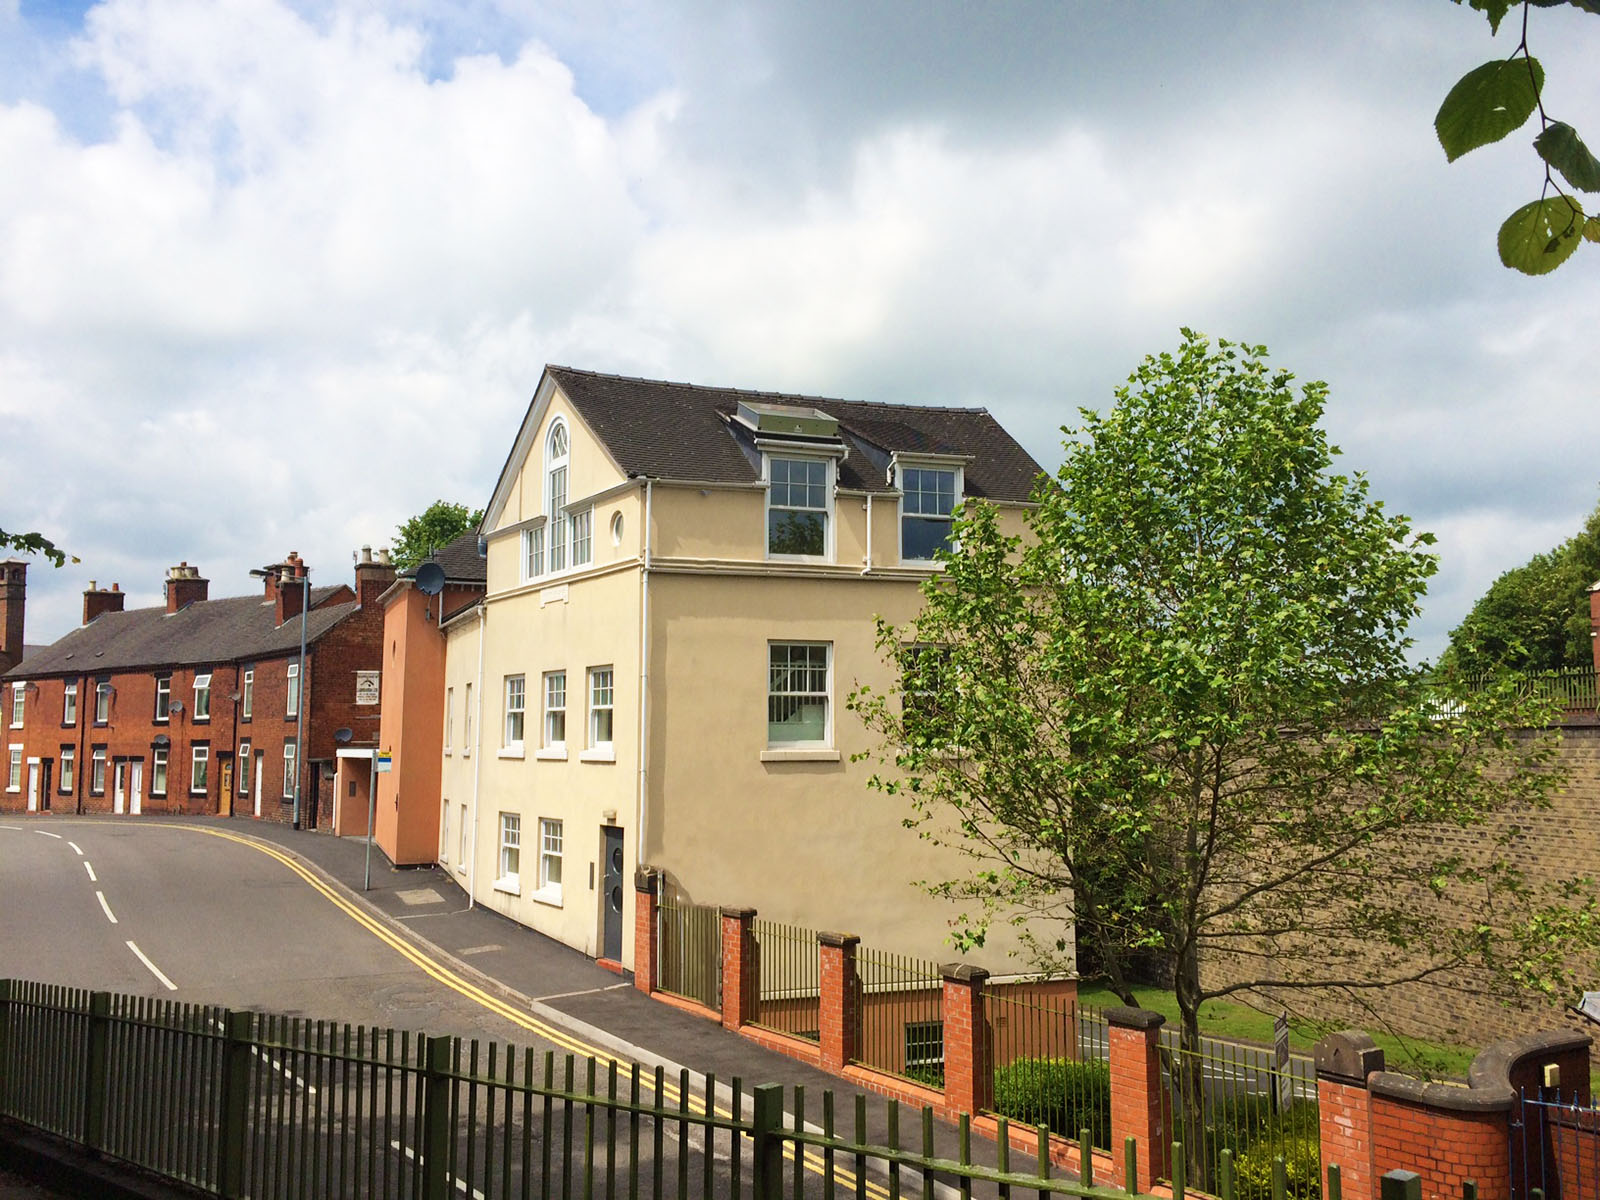 External view of a 3 storey yellow house with a large tree in the garden area to the right